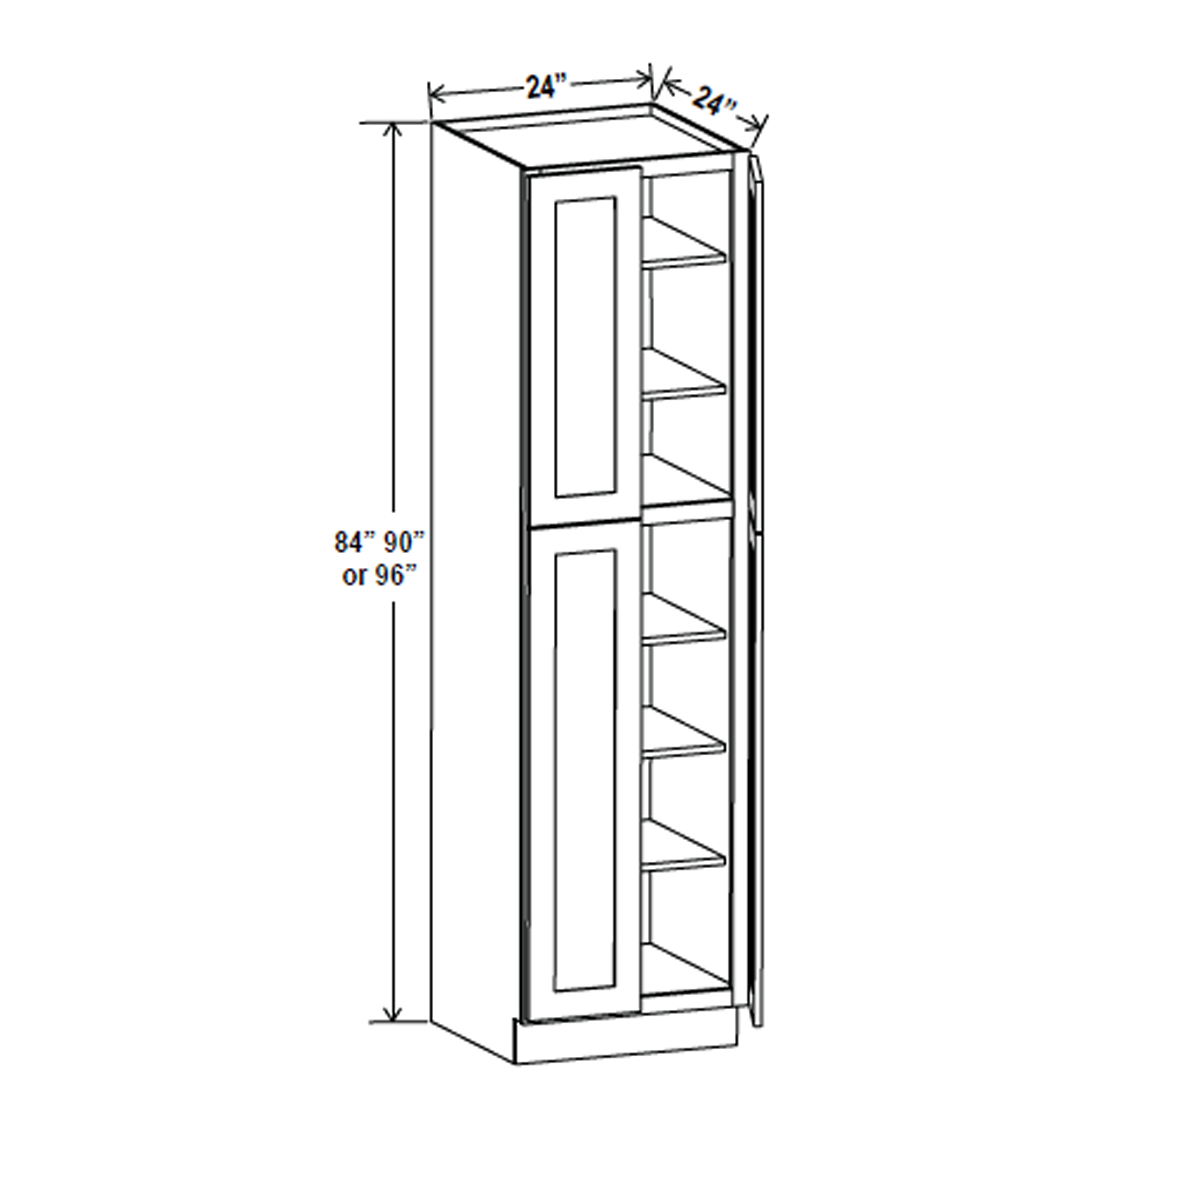 Wall Pantry Cabinet - 24W x 90H x 24D - Grey Shaker Cabinet